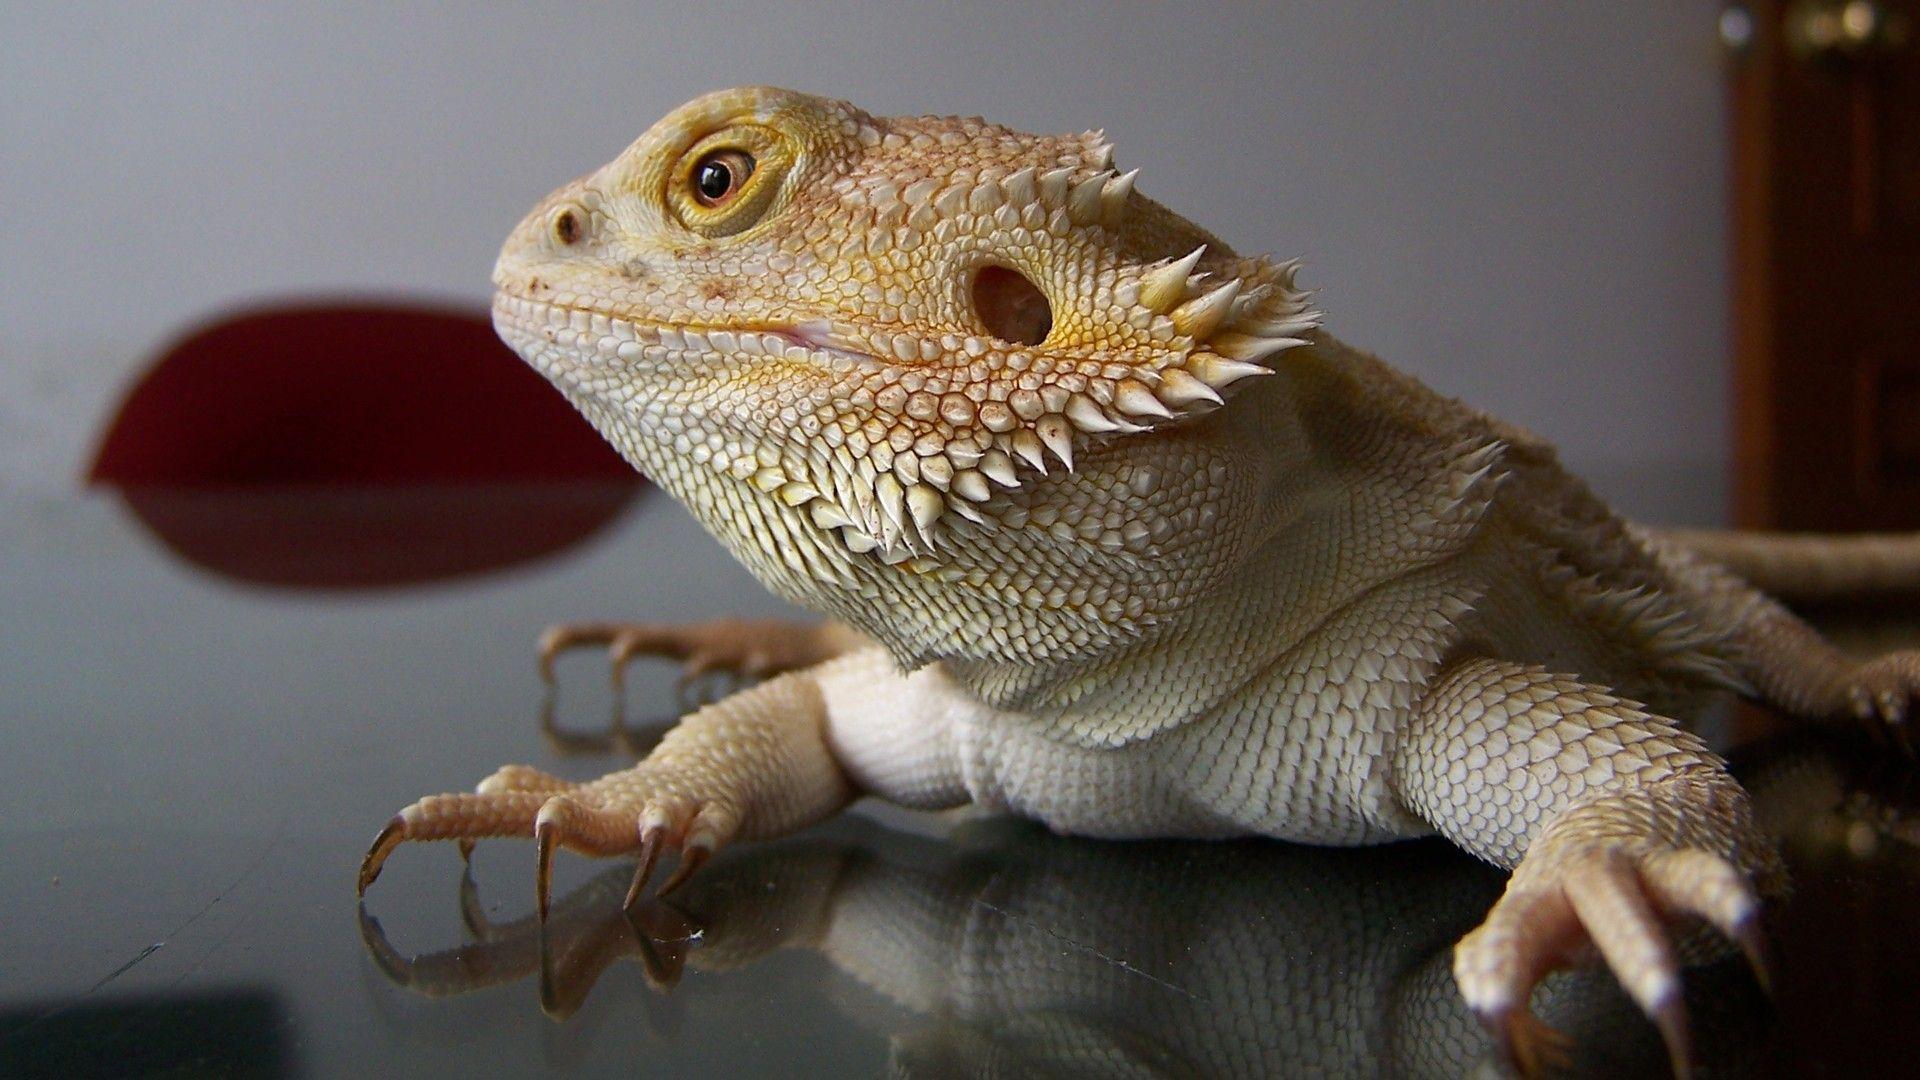 lizards image Bearded Dragon HD wallpaper and background photo